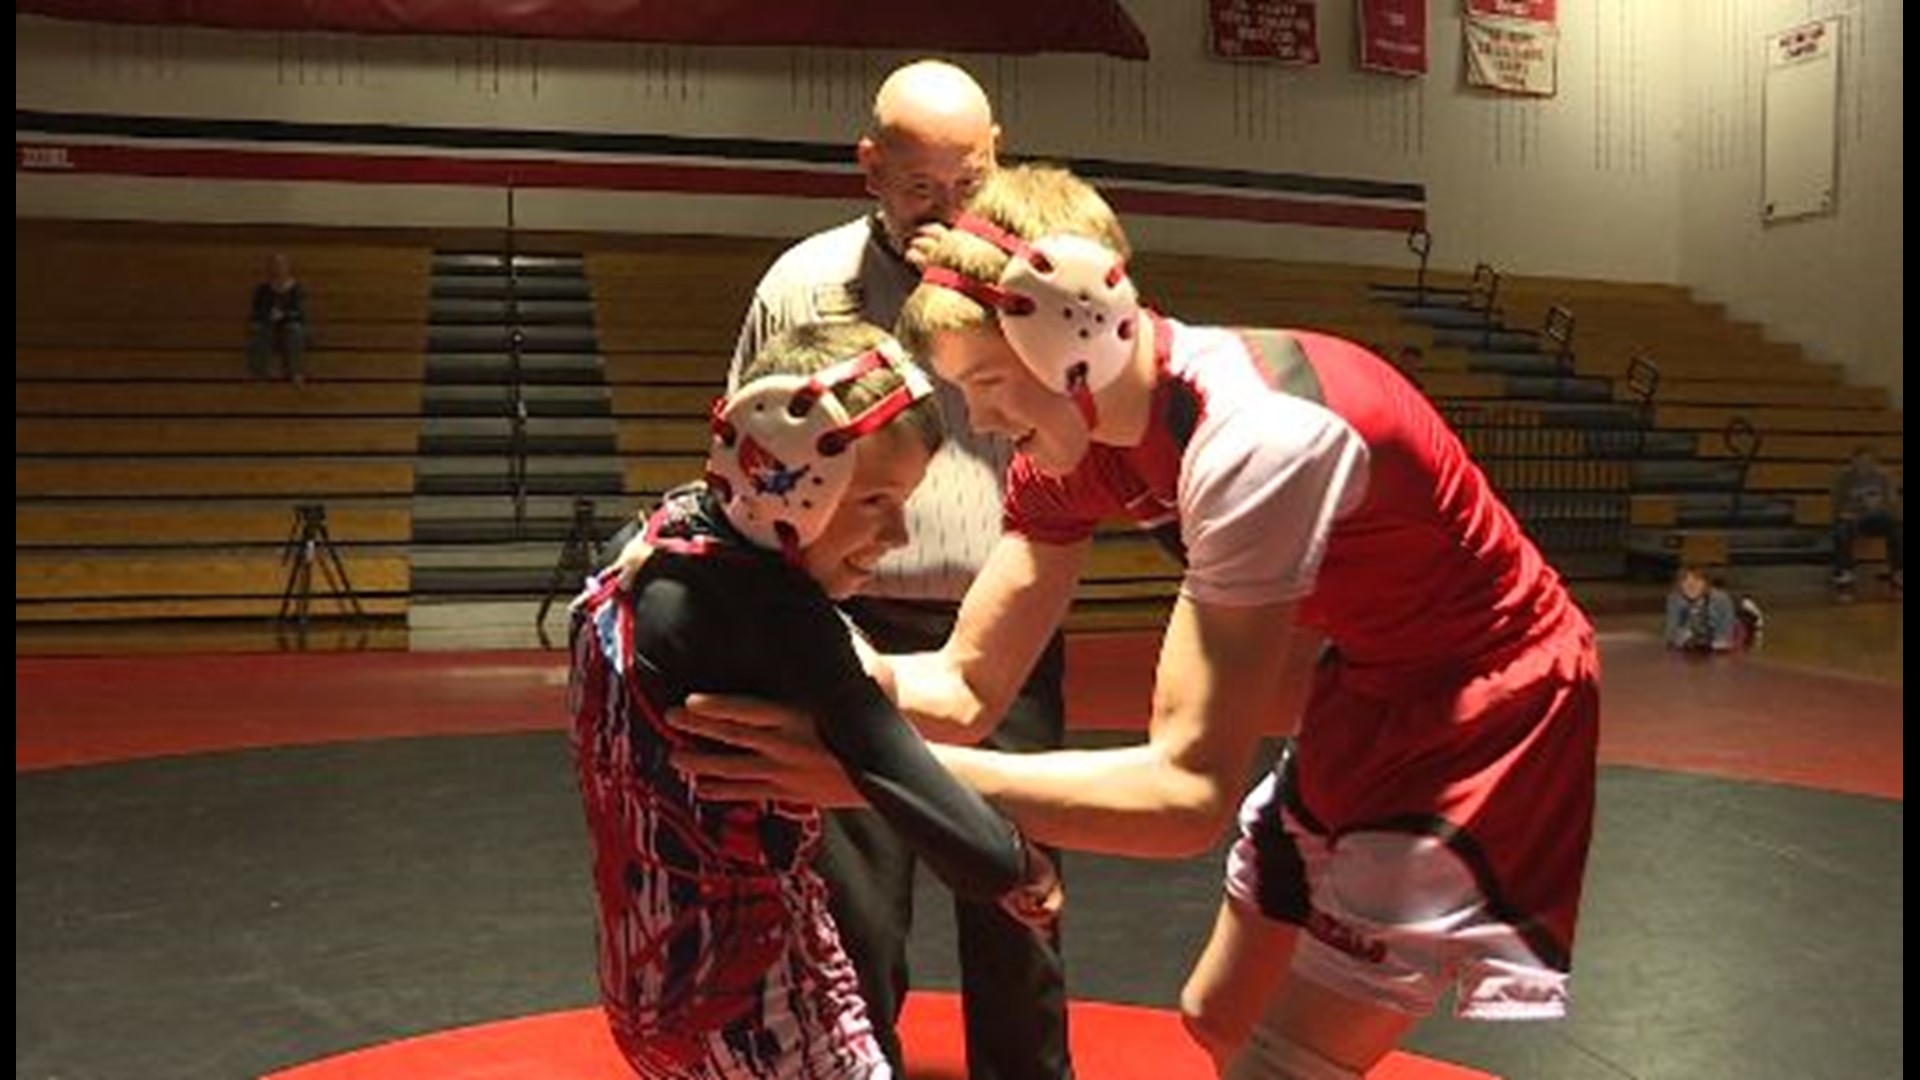 Elizabeth senior Cody Connelley is a wrestler with cerebral palsy, who won his first match against his own cousin. Cody's twin sister Karlie set up the entire event.